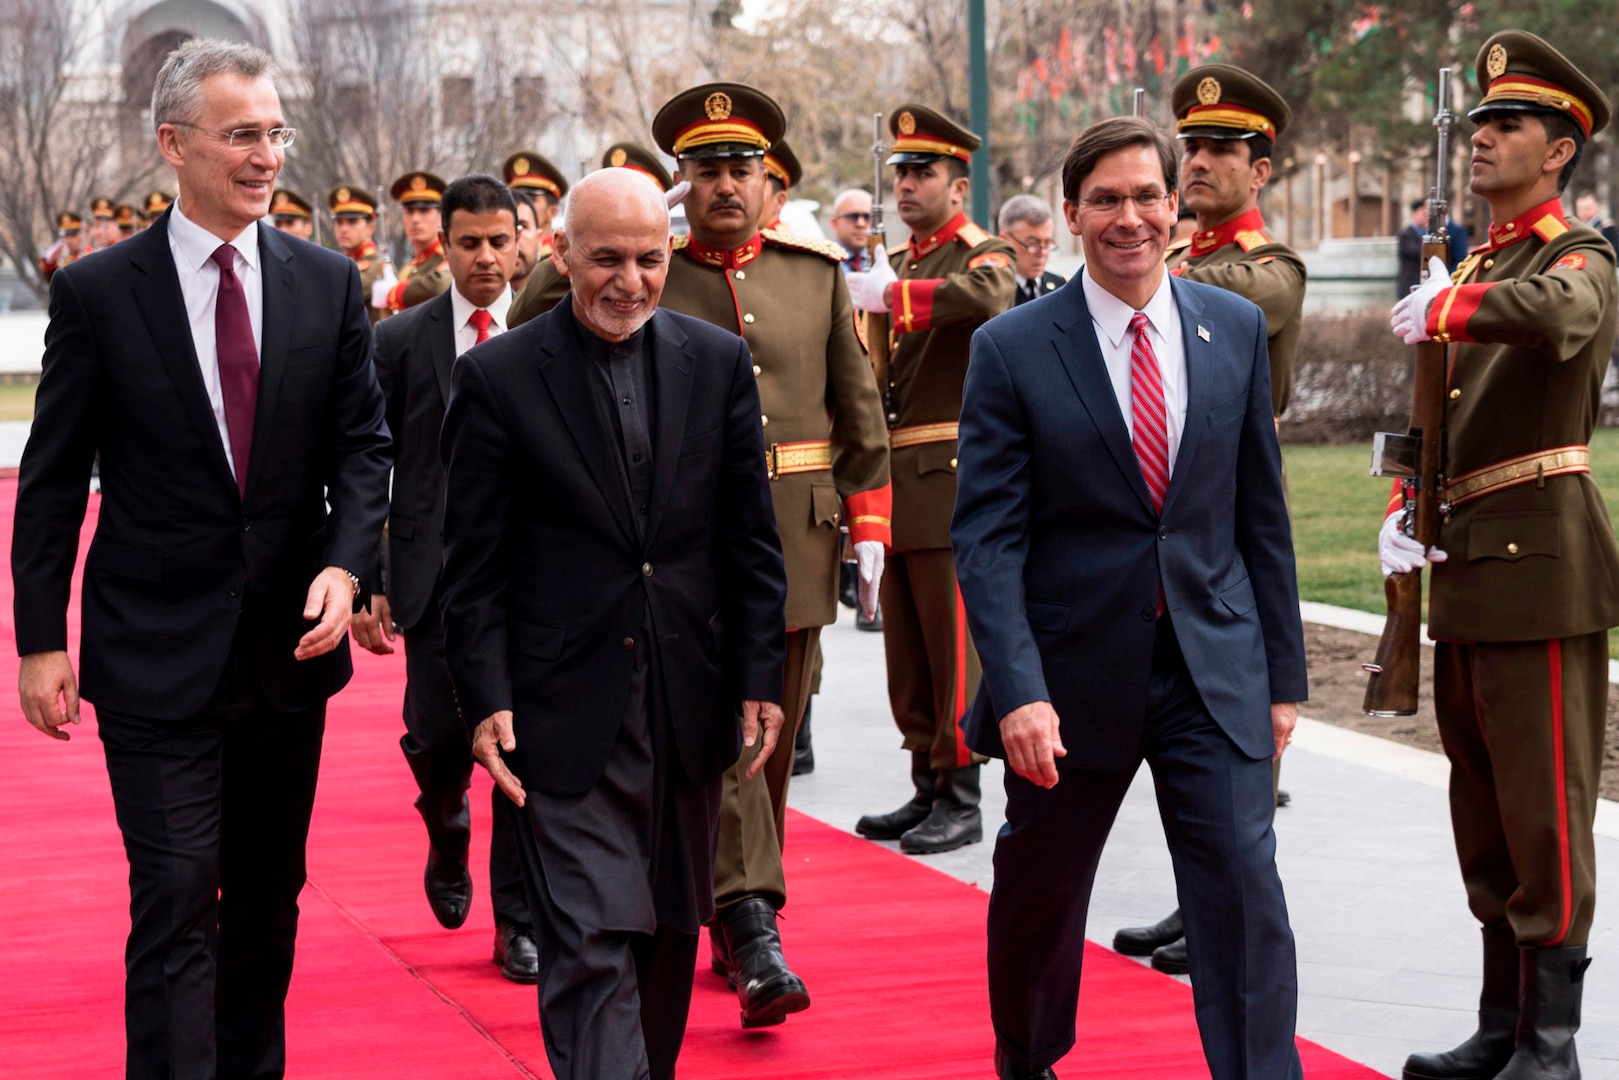 Defense Secretary Dr. Mark T. Esper and two other civilians walk on a red carpet.